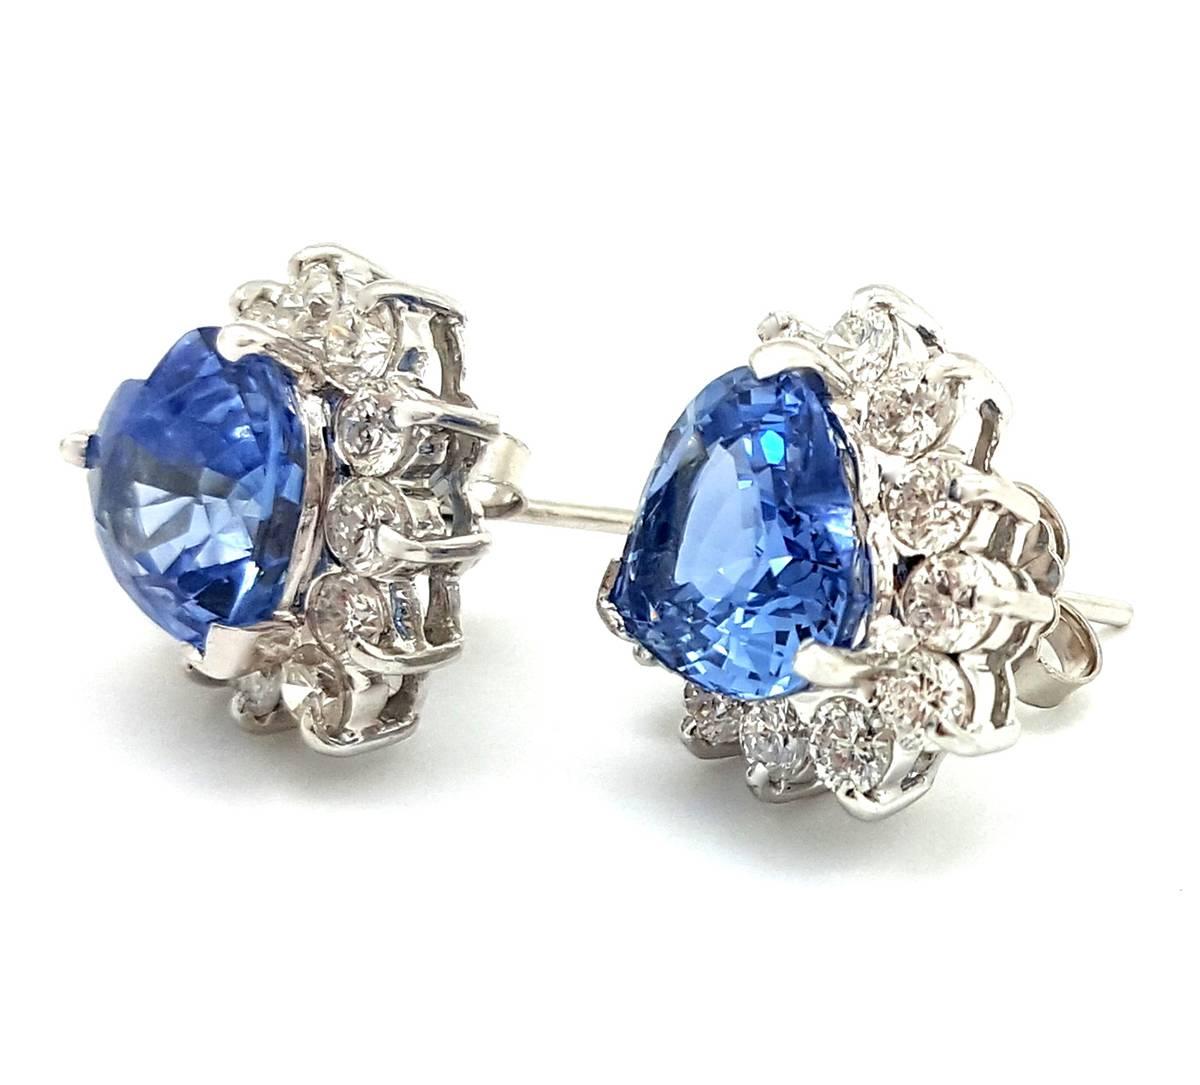 These gorgeous earrings will make your heart sing! The earrings are made in 18k white gold. Each lovely earring features a heart shaped Ceylon cornflower colored blue sapphire set with a halo of 12 round diamond melee. These beautiful diamonds have